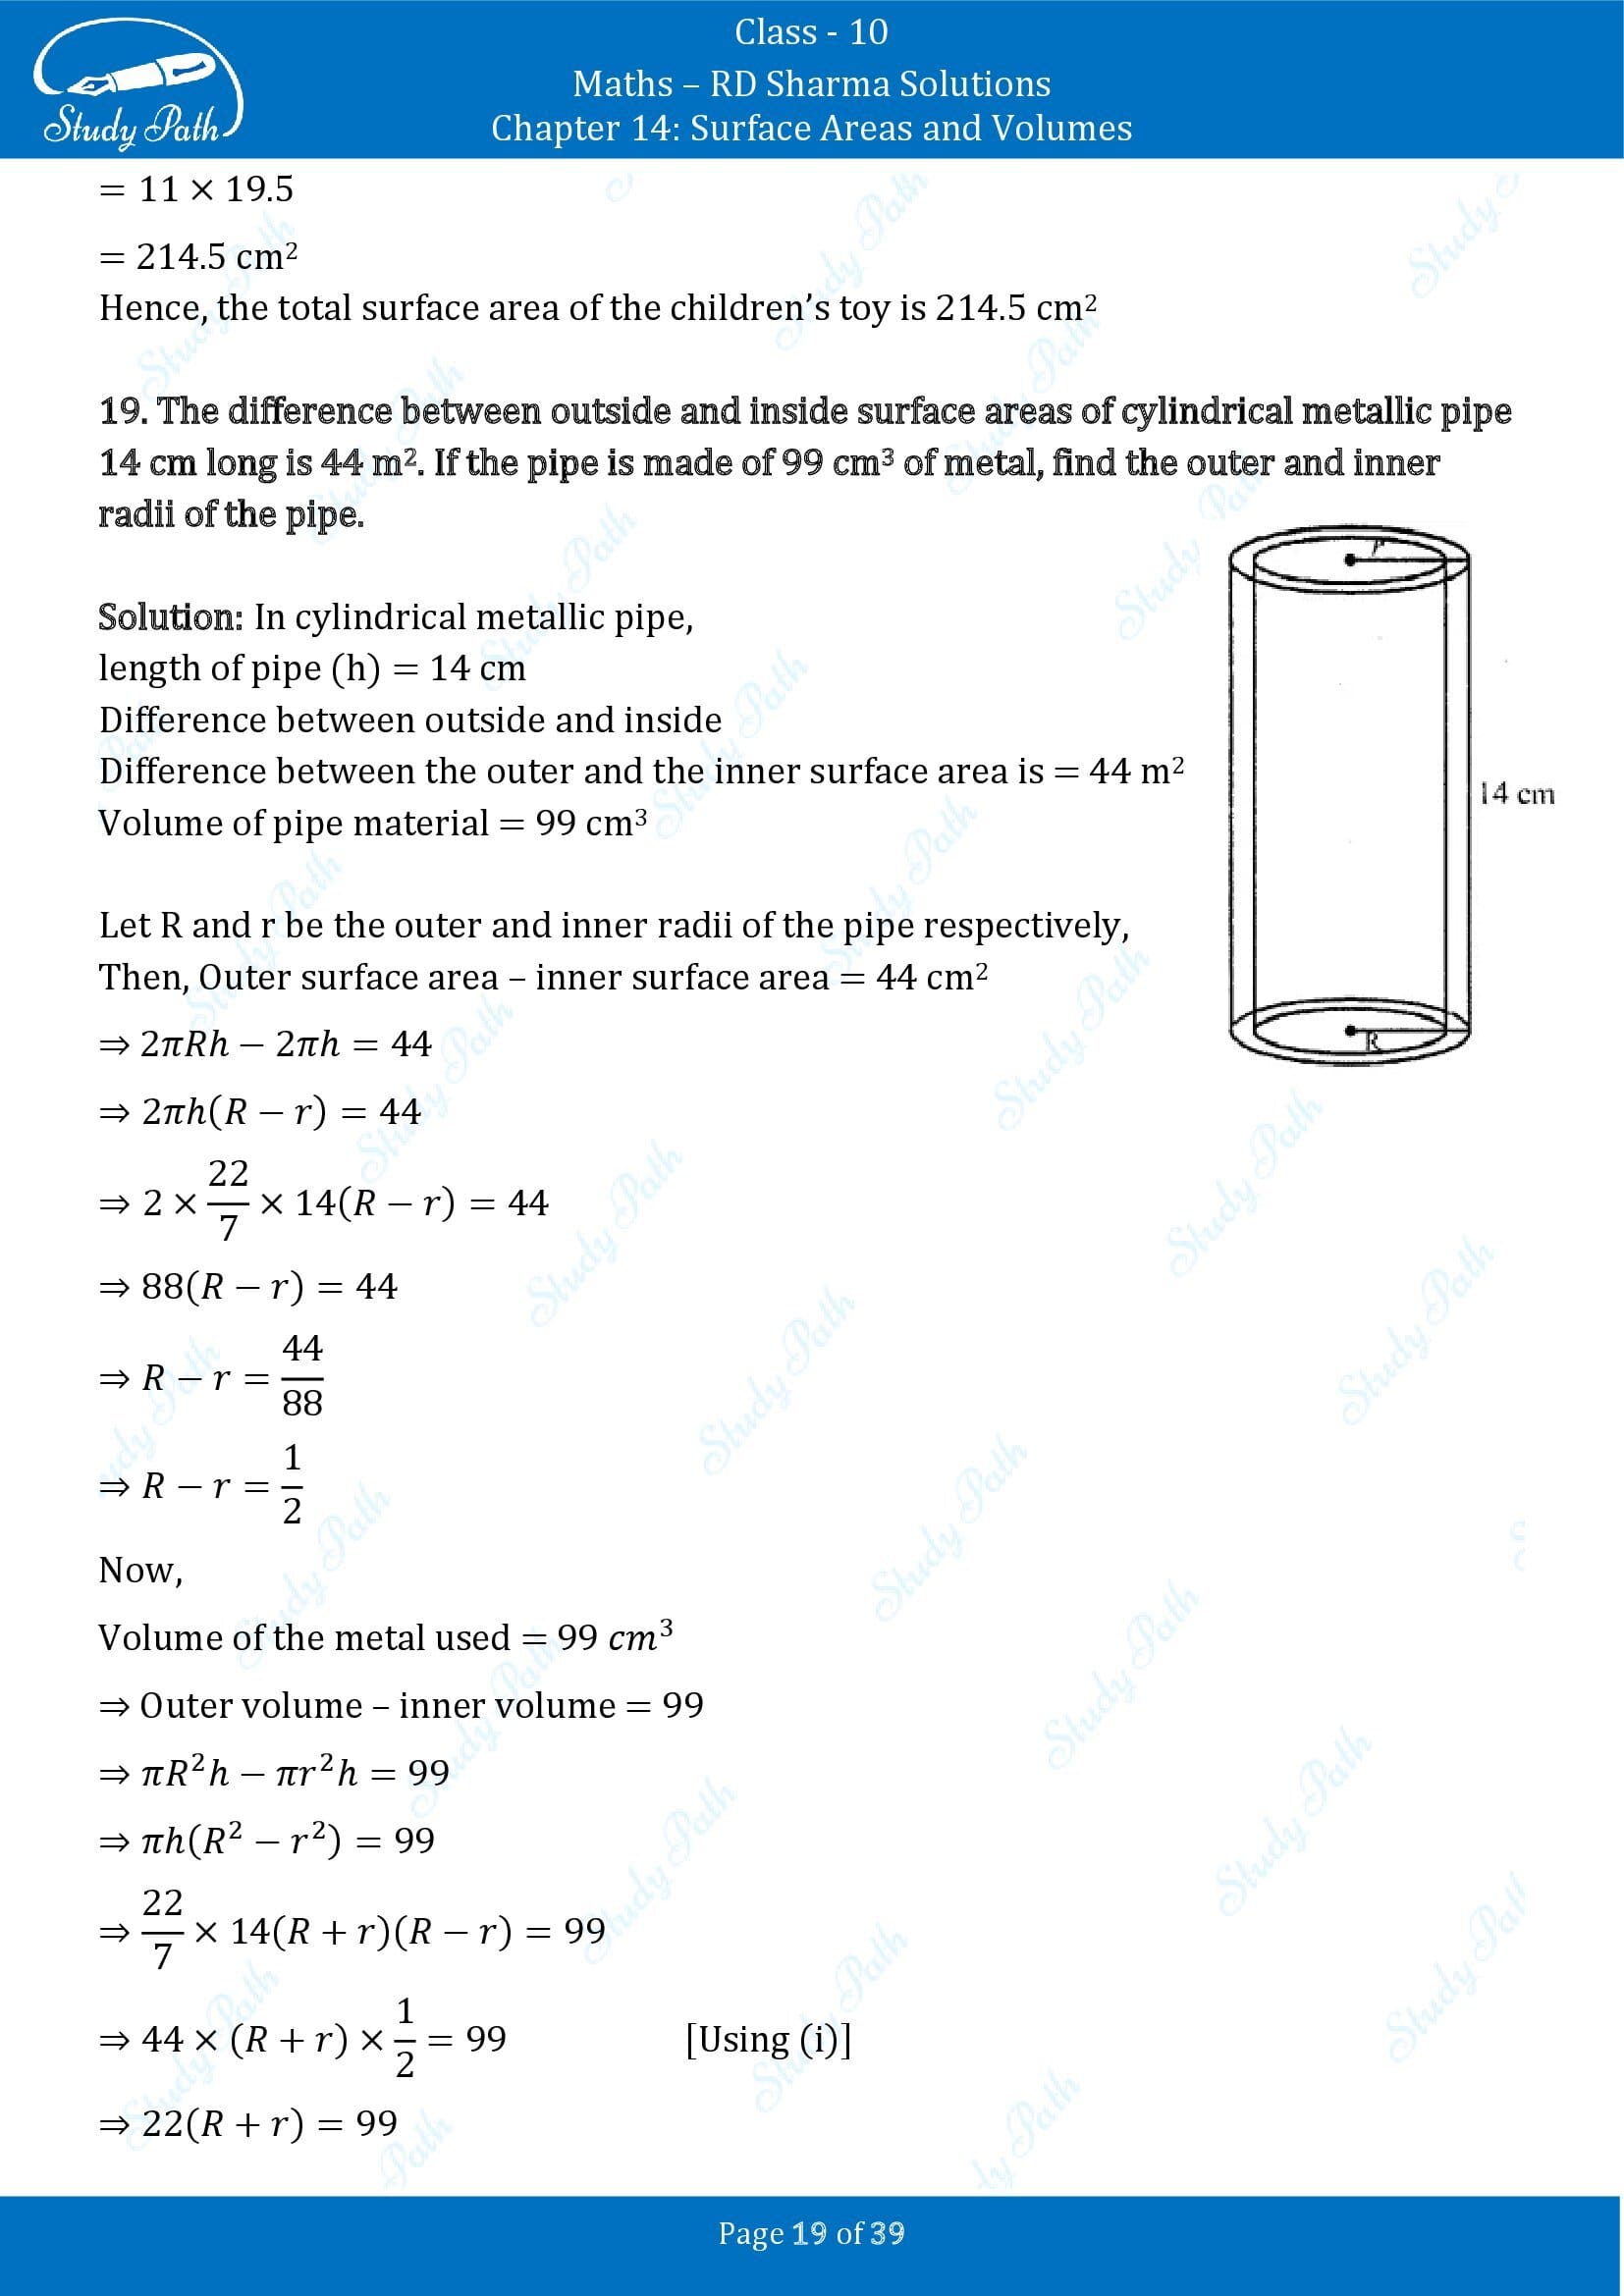 RD Sharma Solutions Class 10 Chapter 14 Surface Areas and Volumes Exercise 14.2 00019